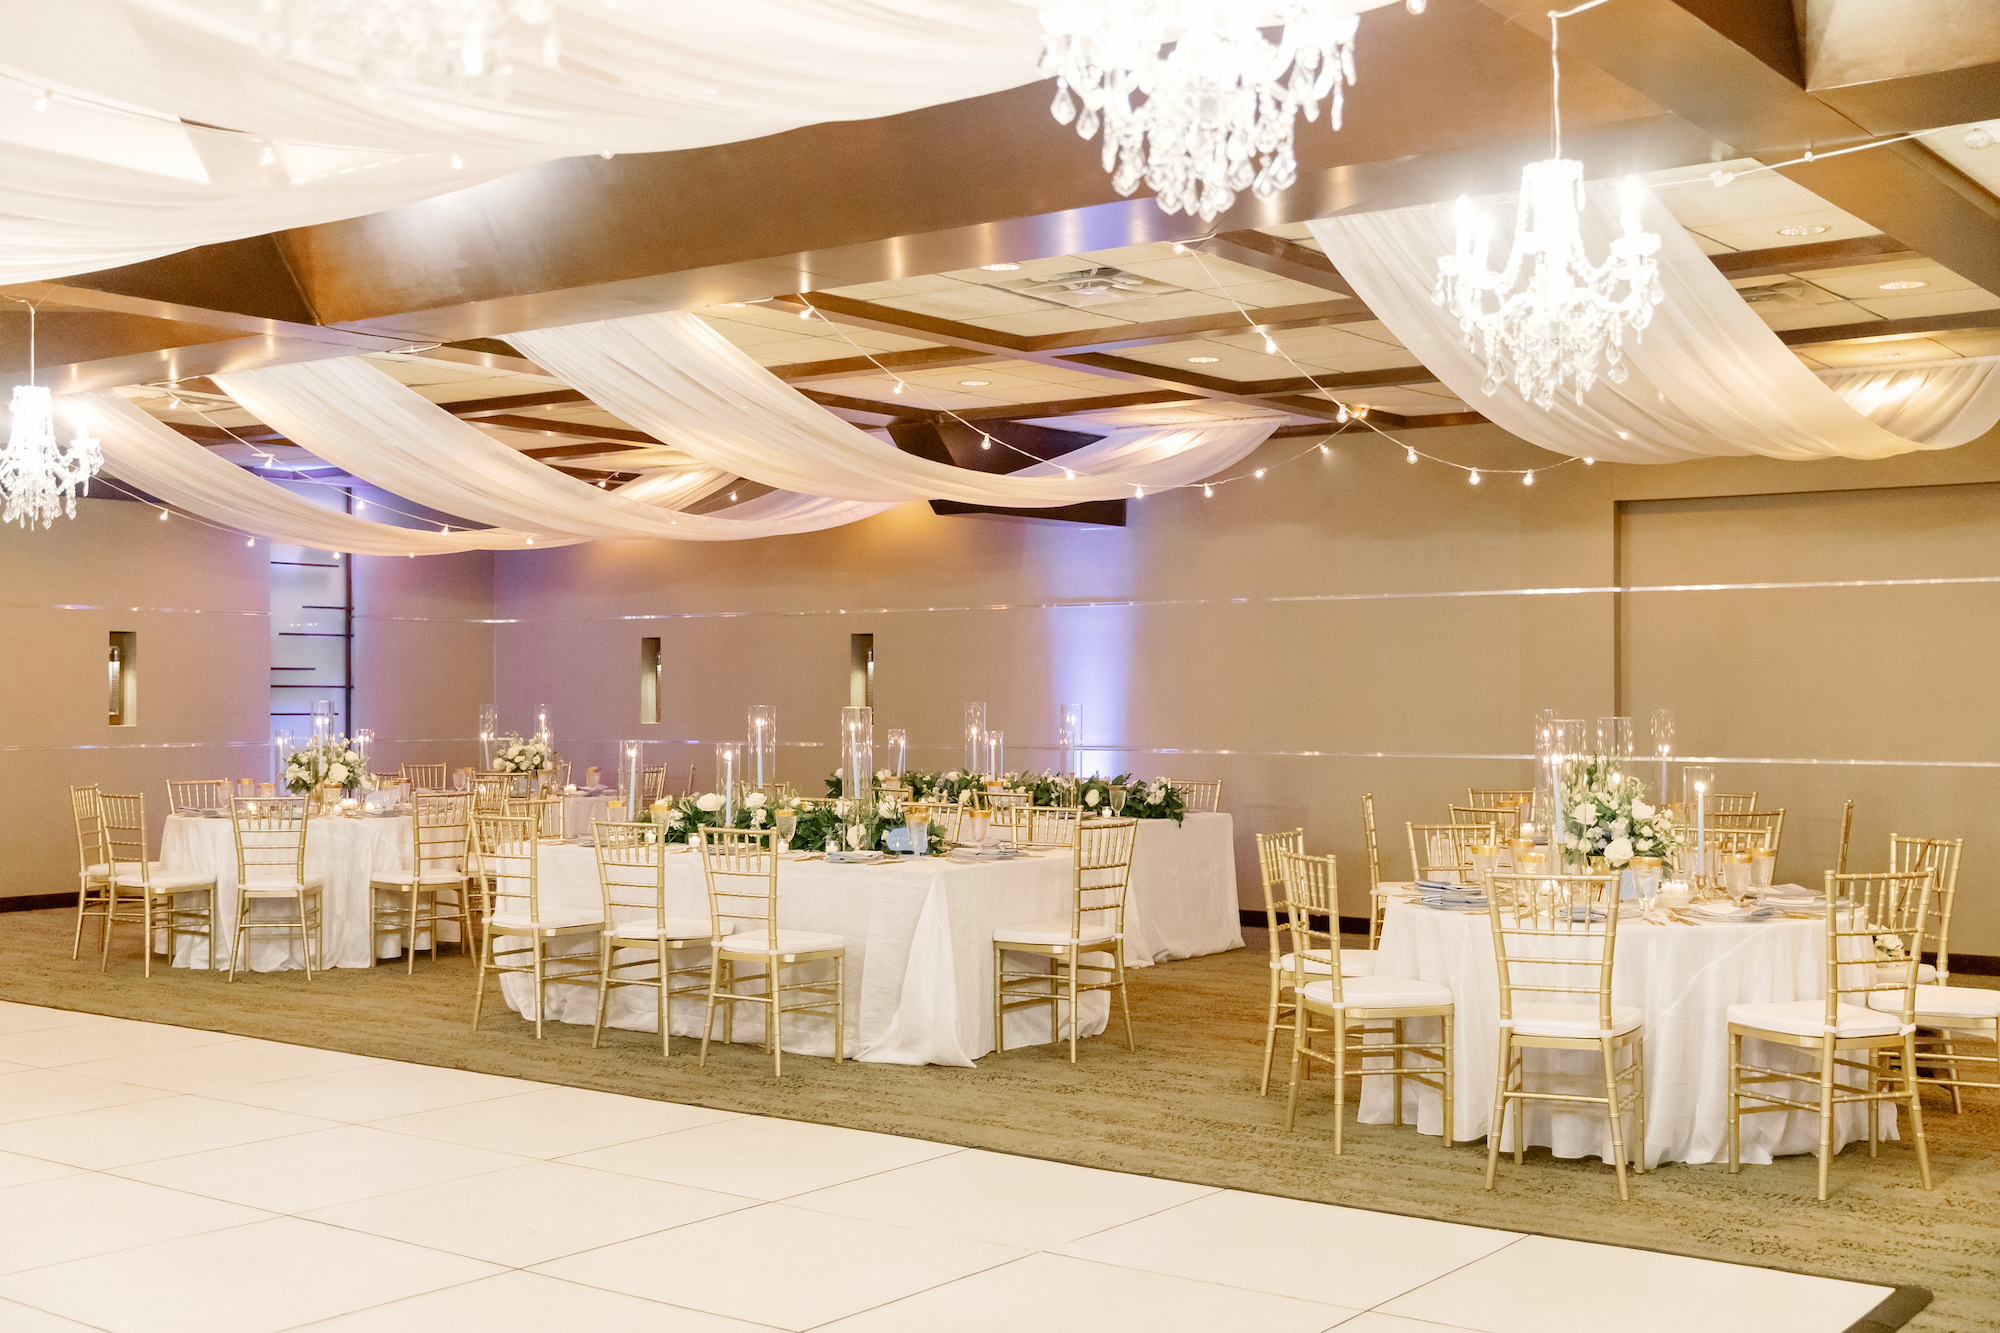 Classic Gold and White Wedding Reception Inspiration with Ceiling Draping, Chandeliers, and White Dance Floor